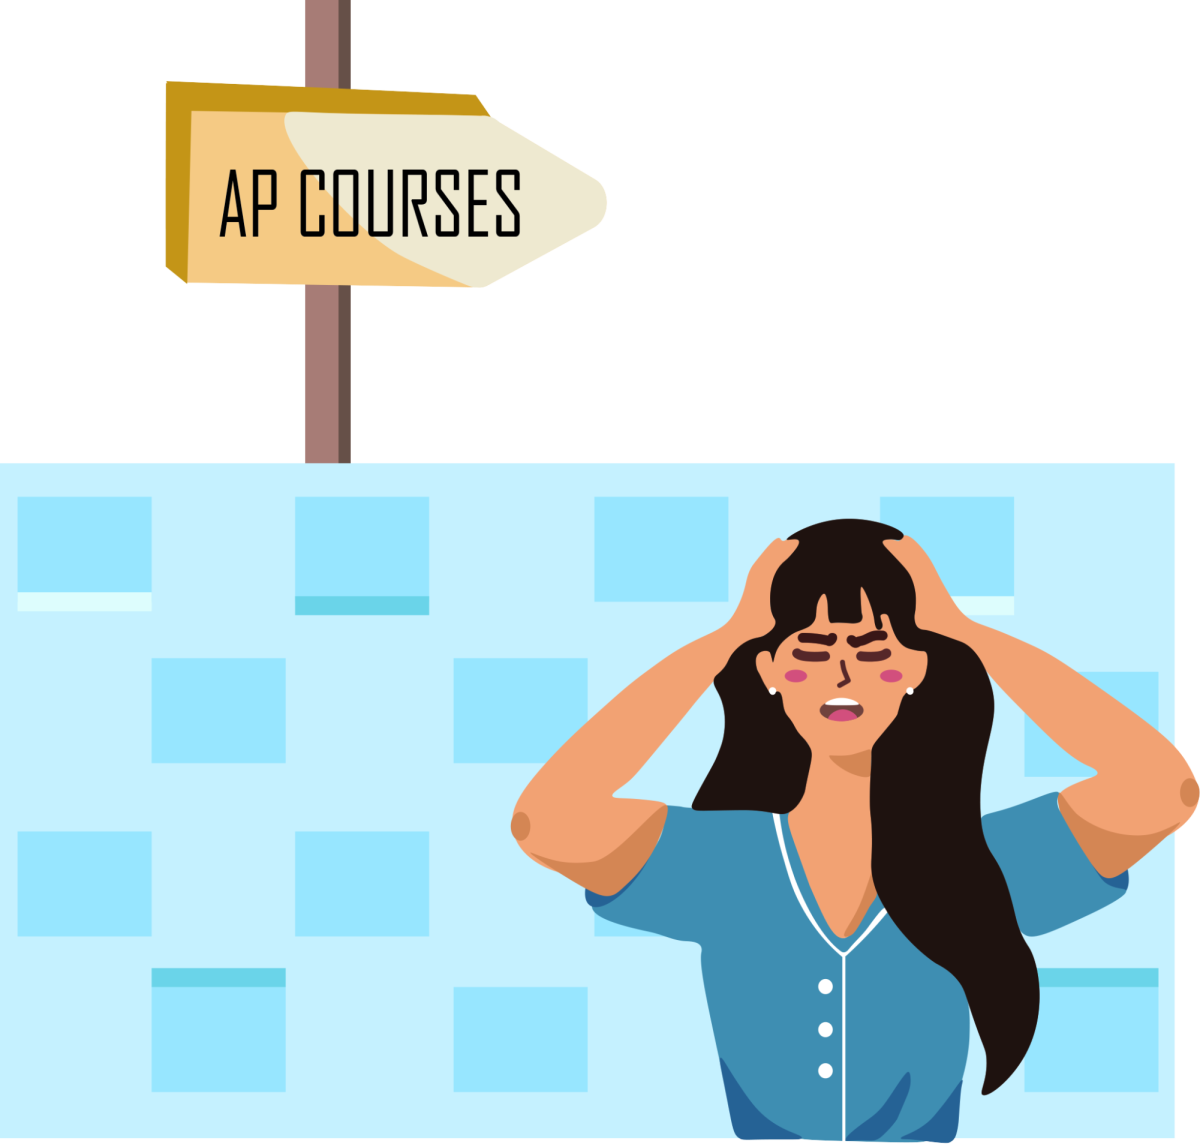 Drawing+of+a+girl+with+hands+on+head+with+AP+COURSES+sign+on+top